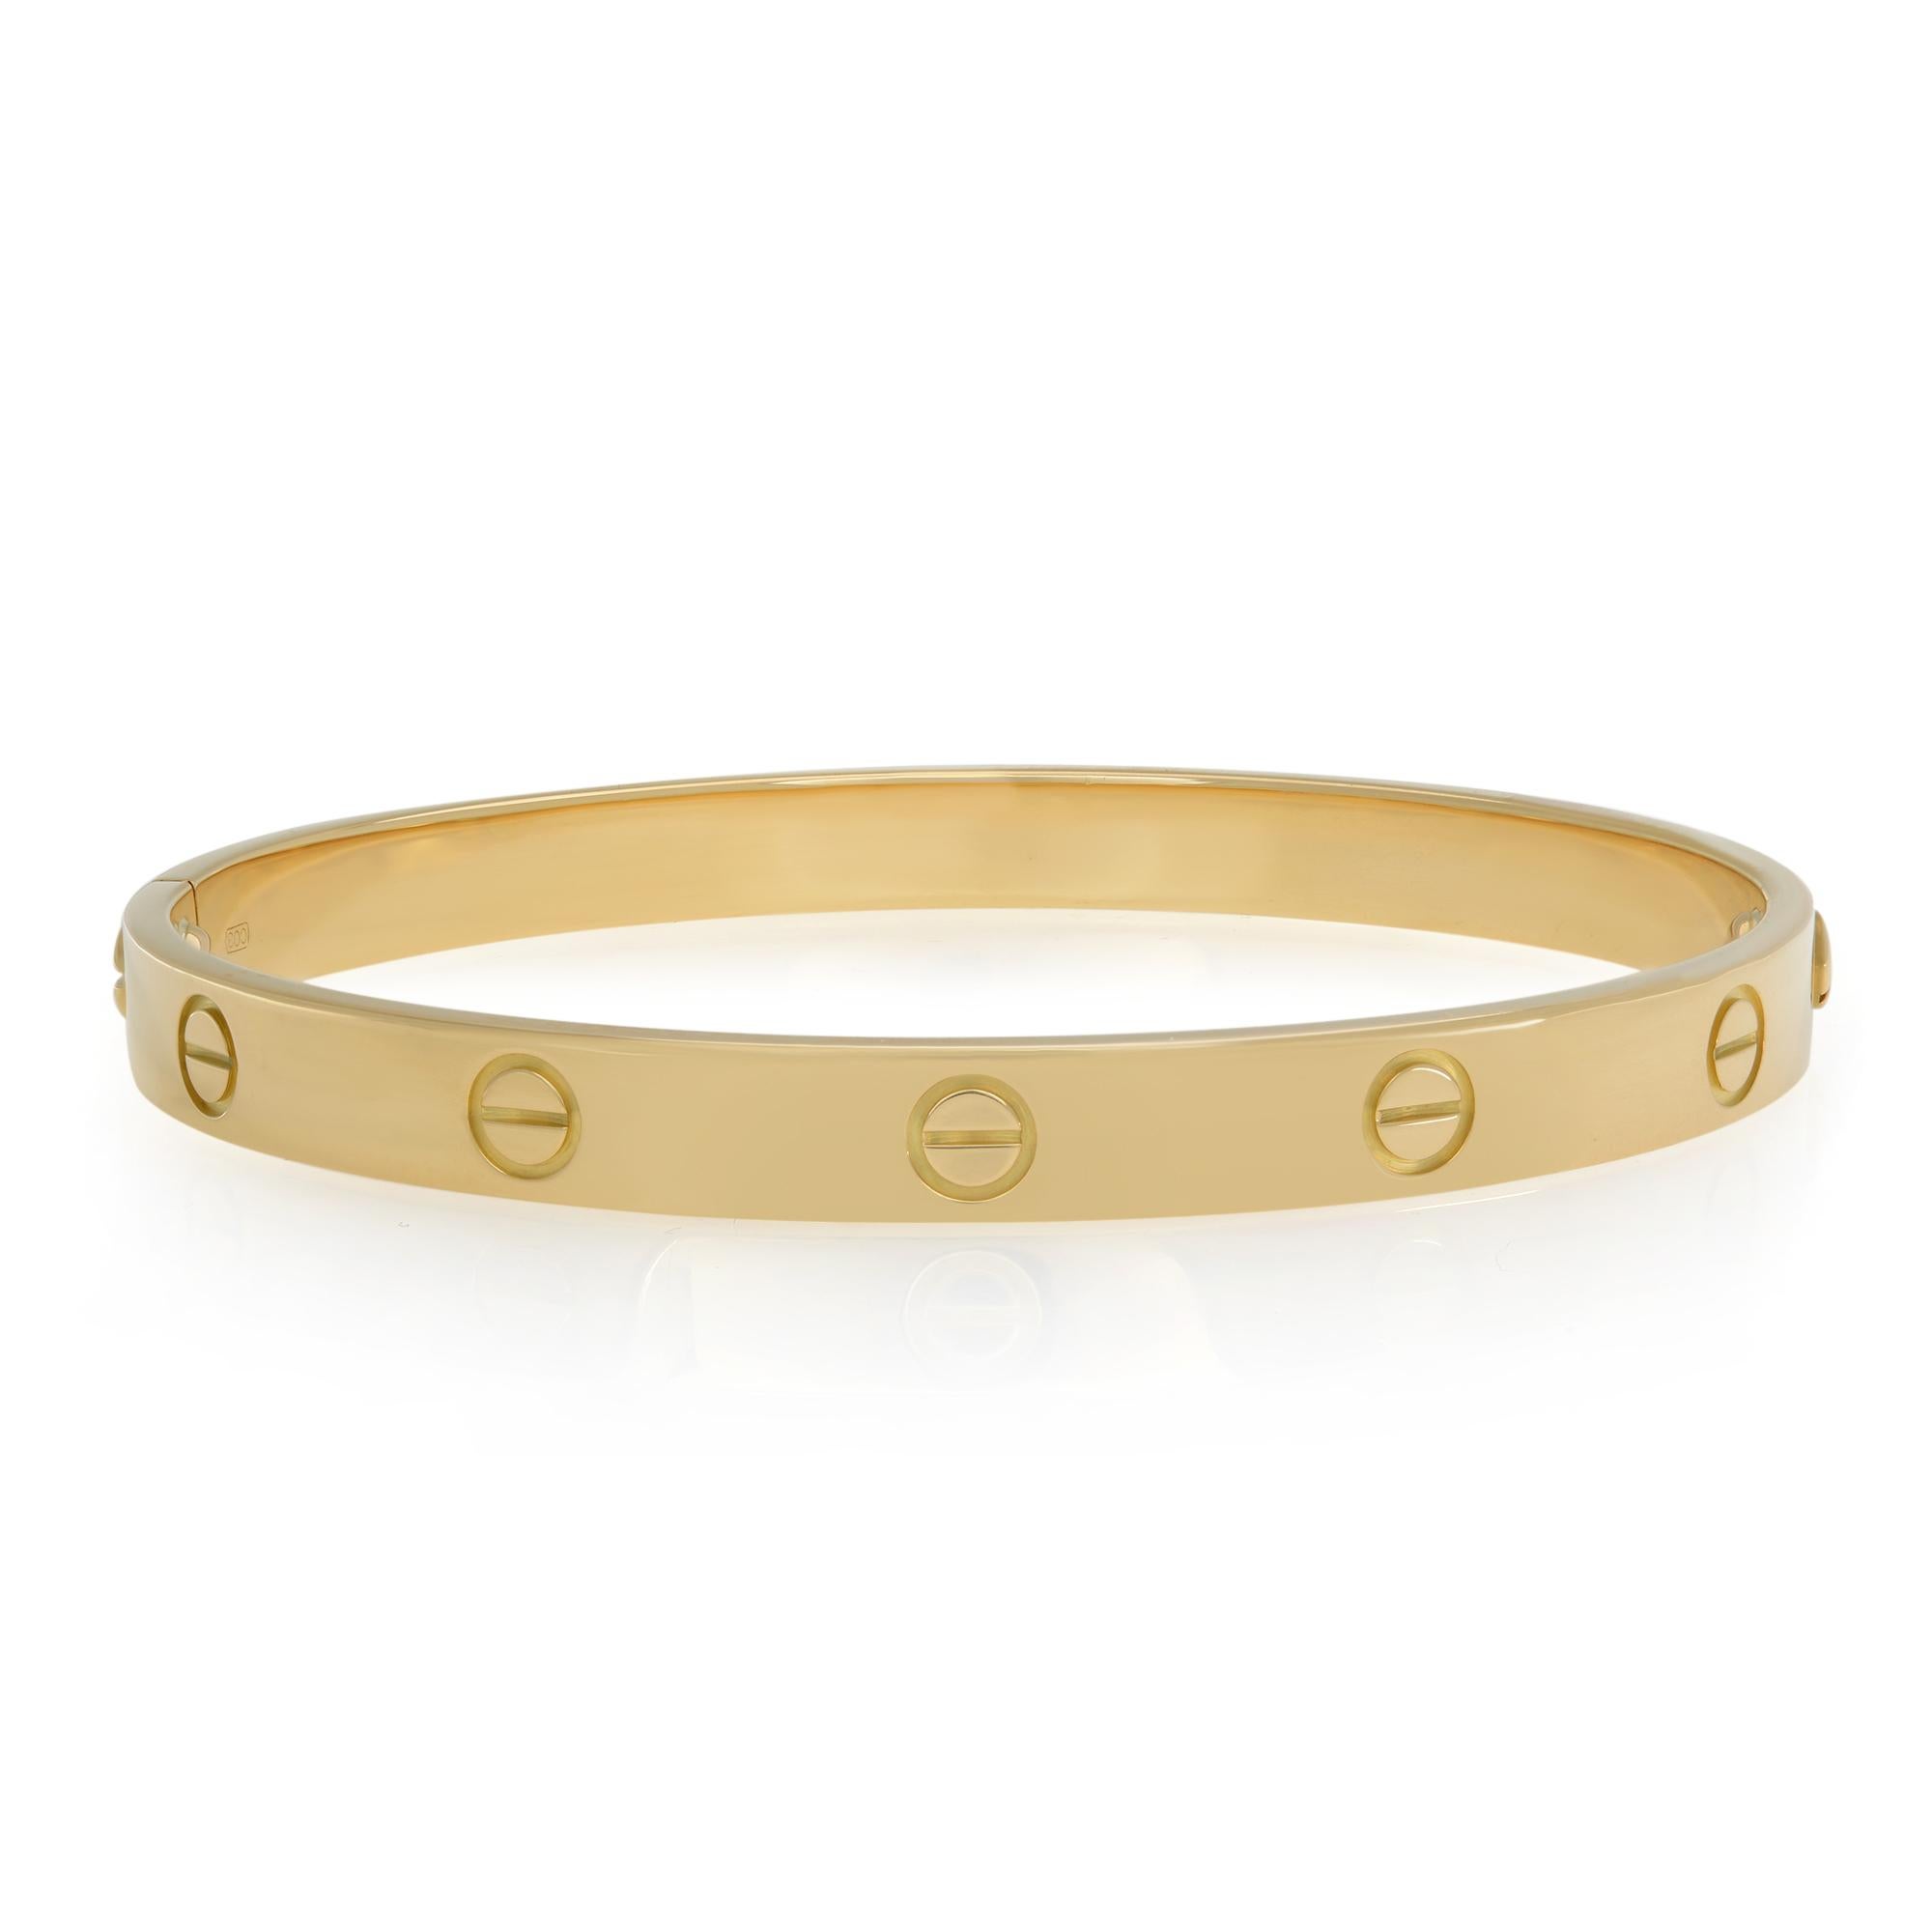 Cartier Love Bracelet 18k Yellow Gold For Sale At 1stdibs